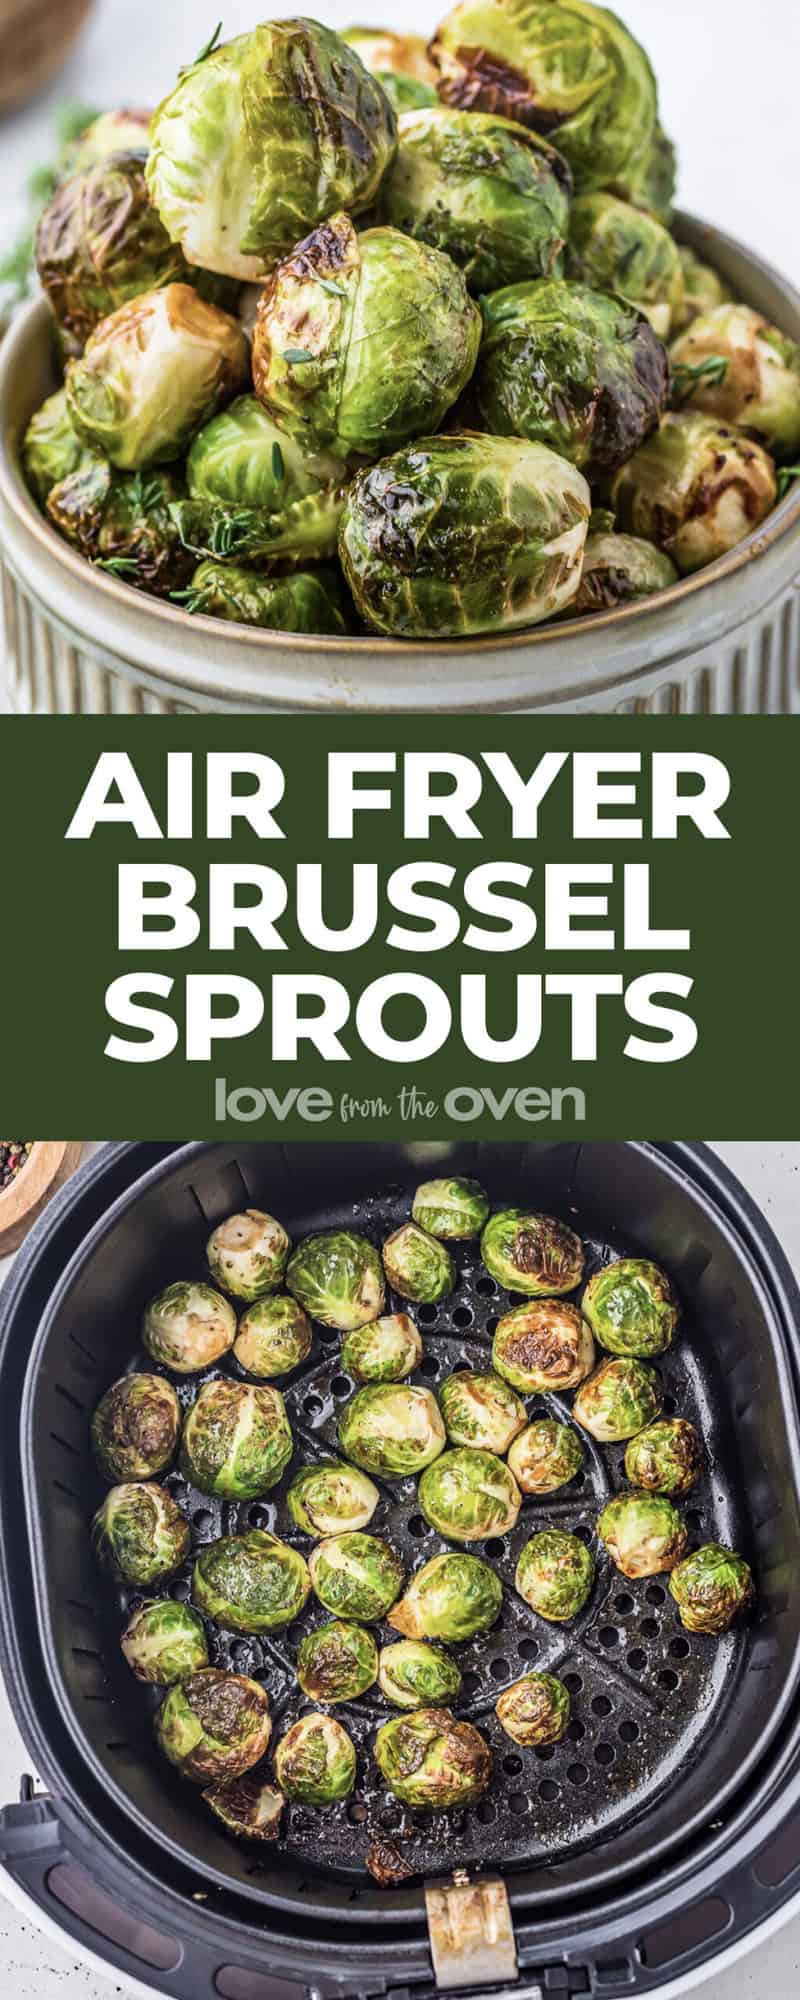 https://www.lovefromtheoven.com/wp-content/uploads/2022/09/air-fryer-brusselss-sprouts-scaled.jpg